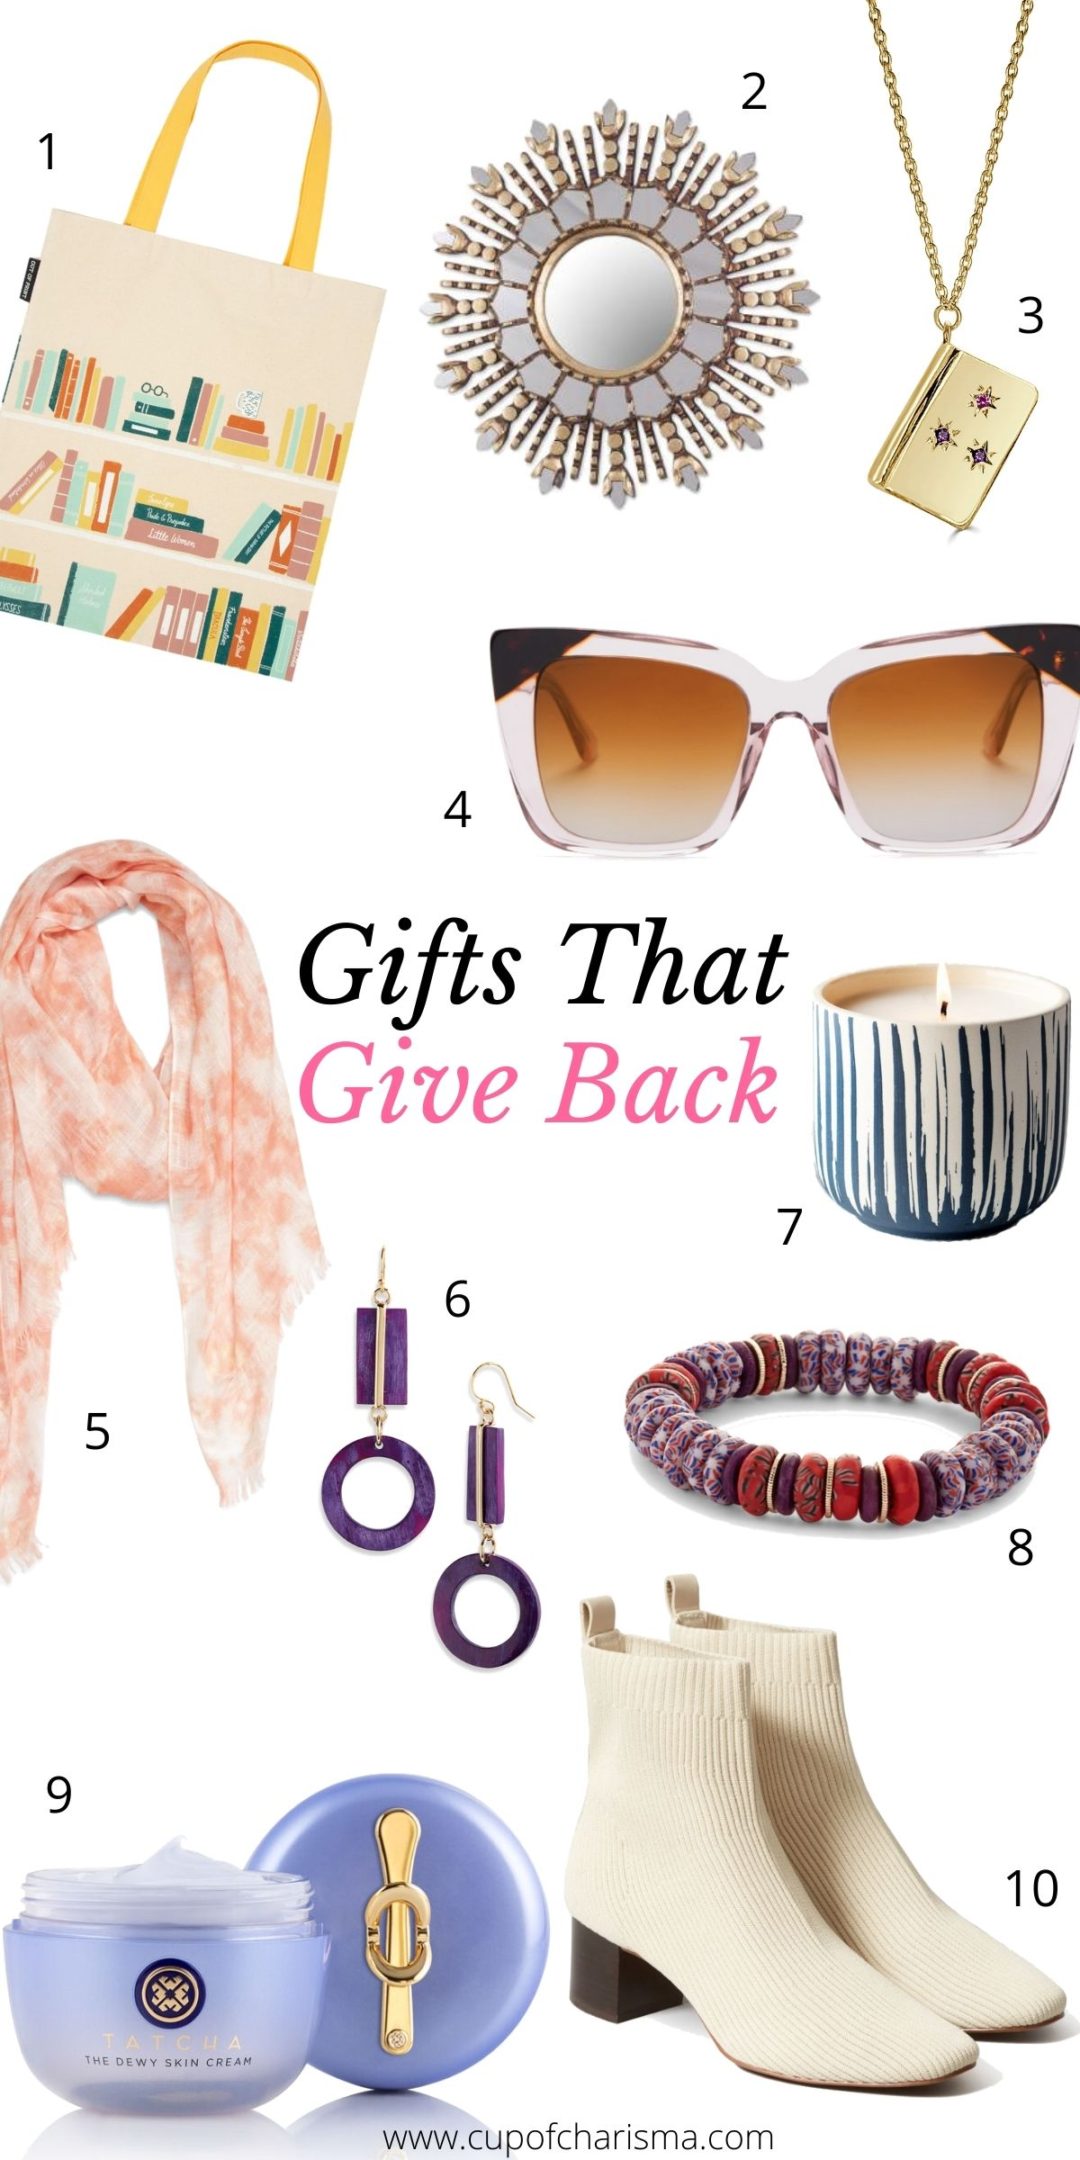 Gifts that Give Back 2020_Cup of Charisma Gift Guide